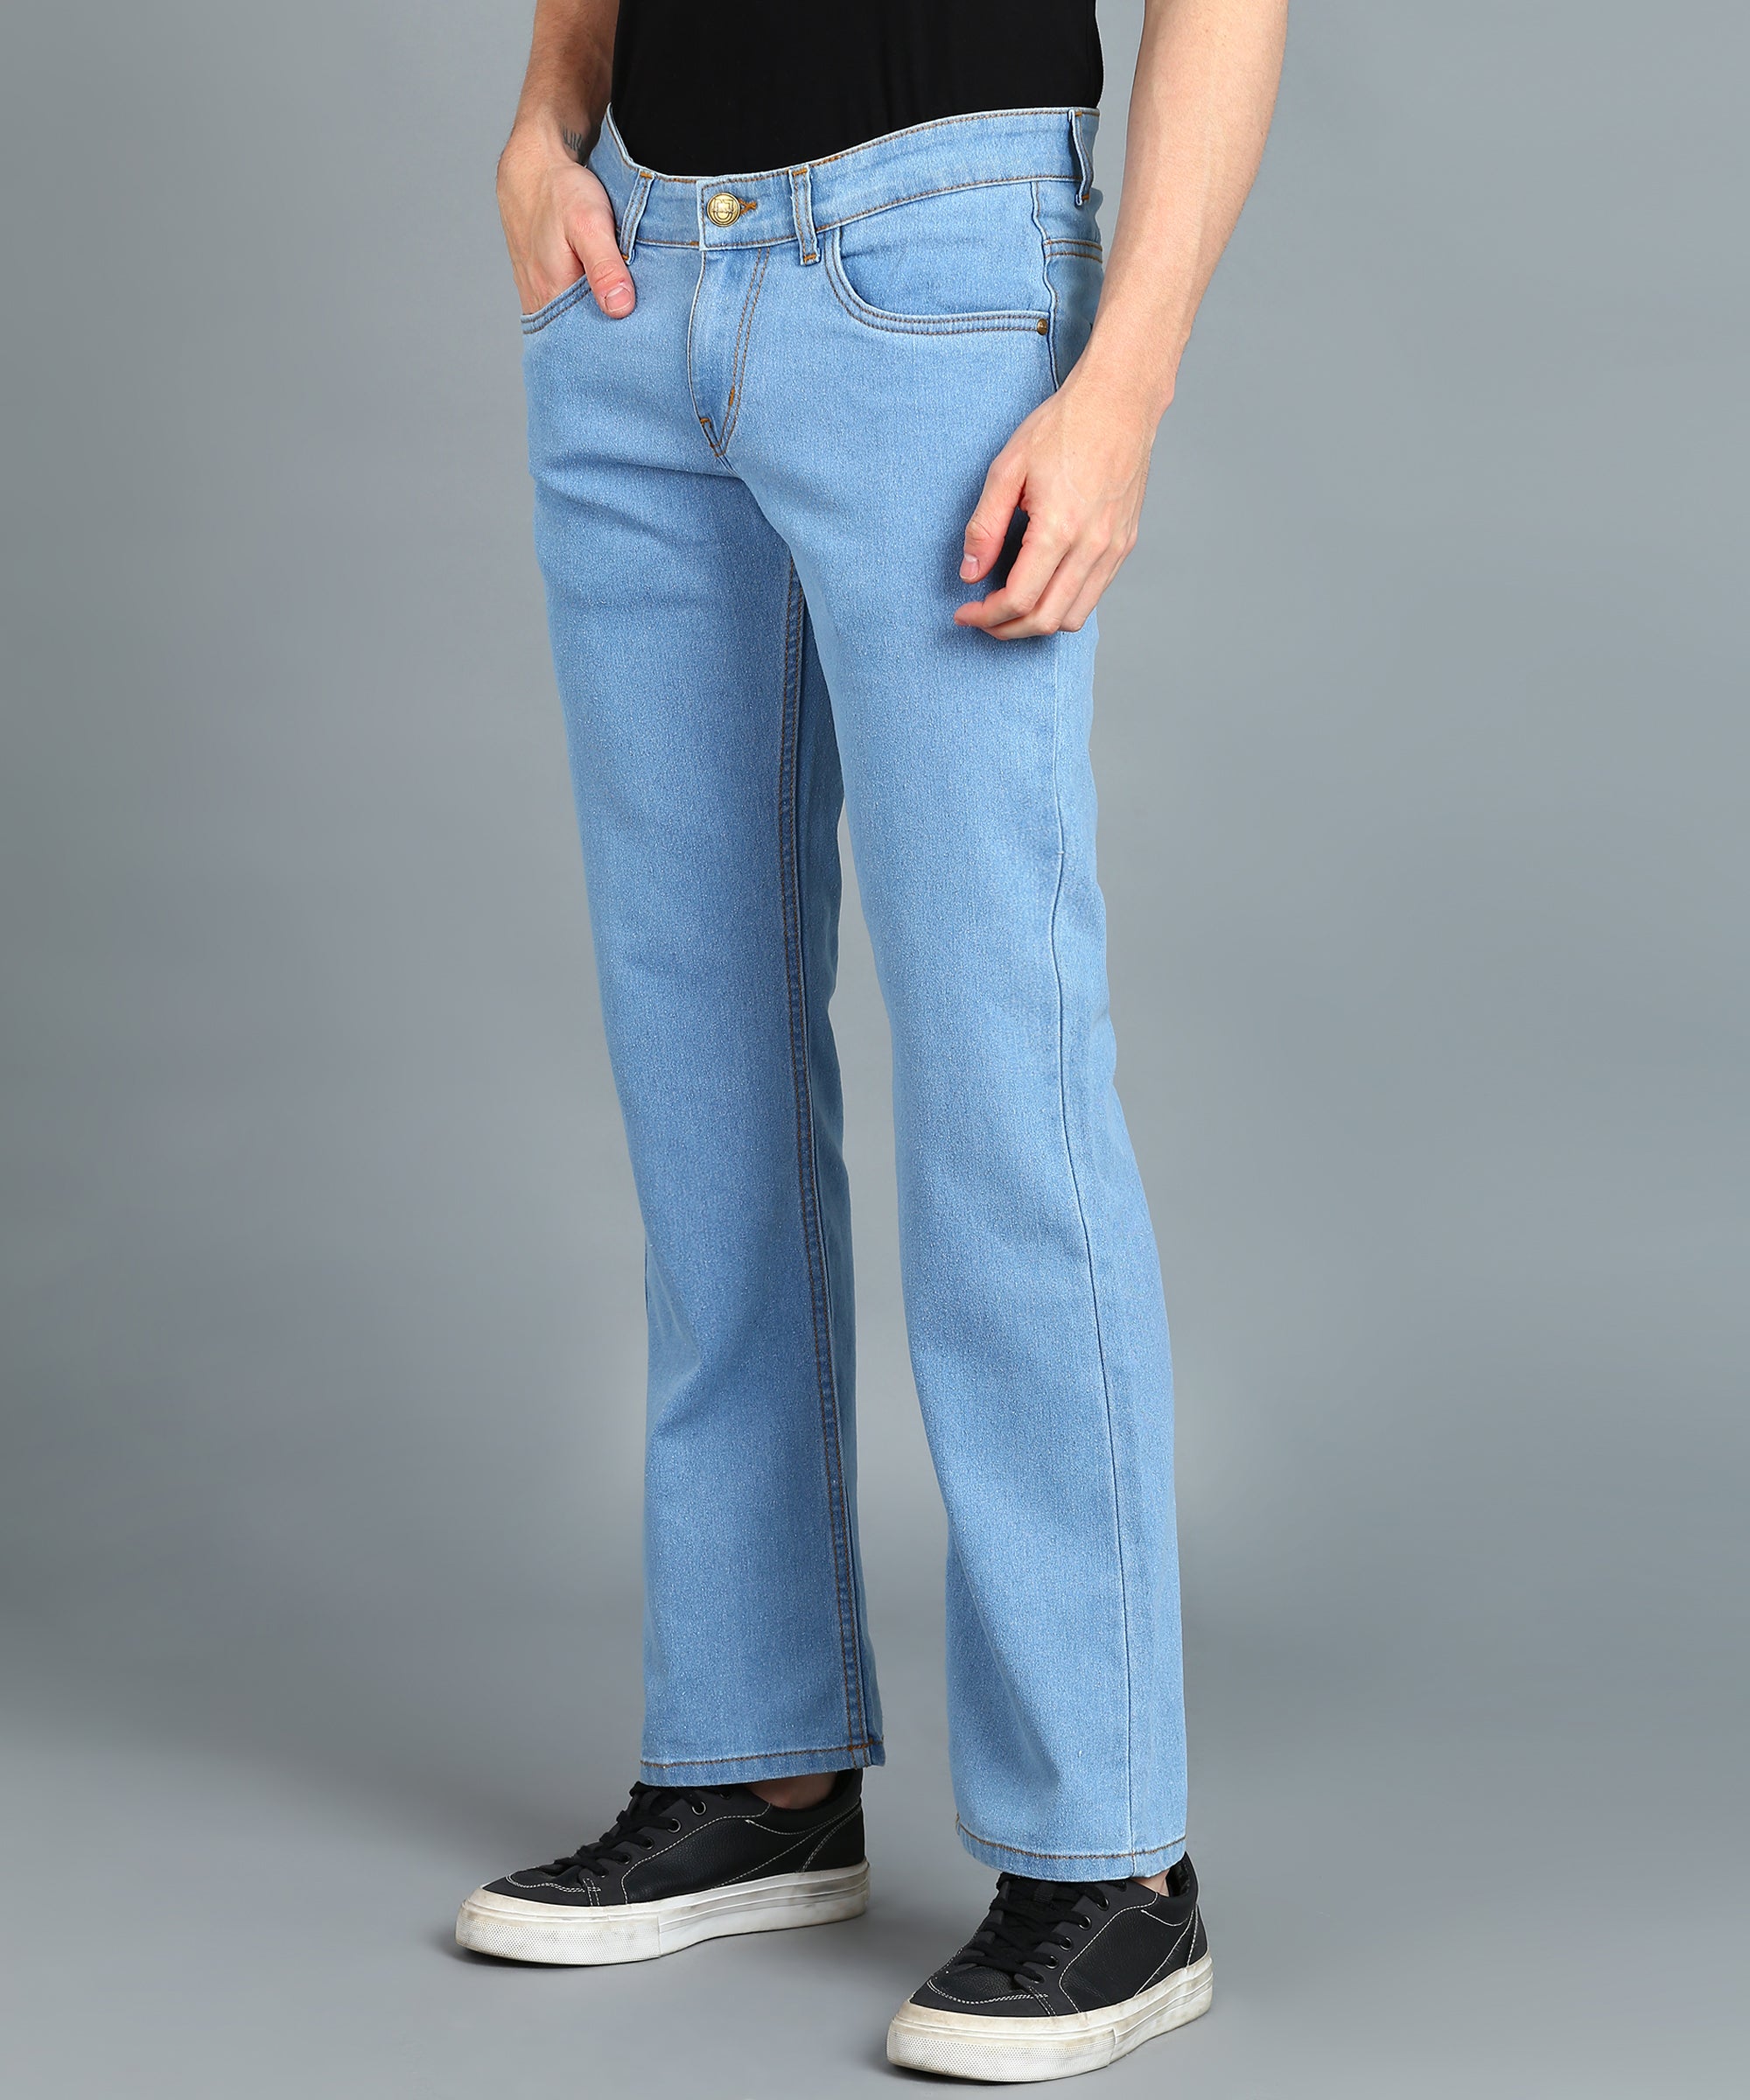 Men's Ice Blue Washed Bootcut Jeans Stretchable